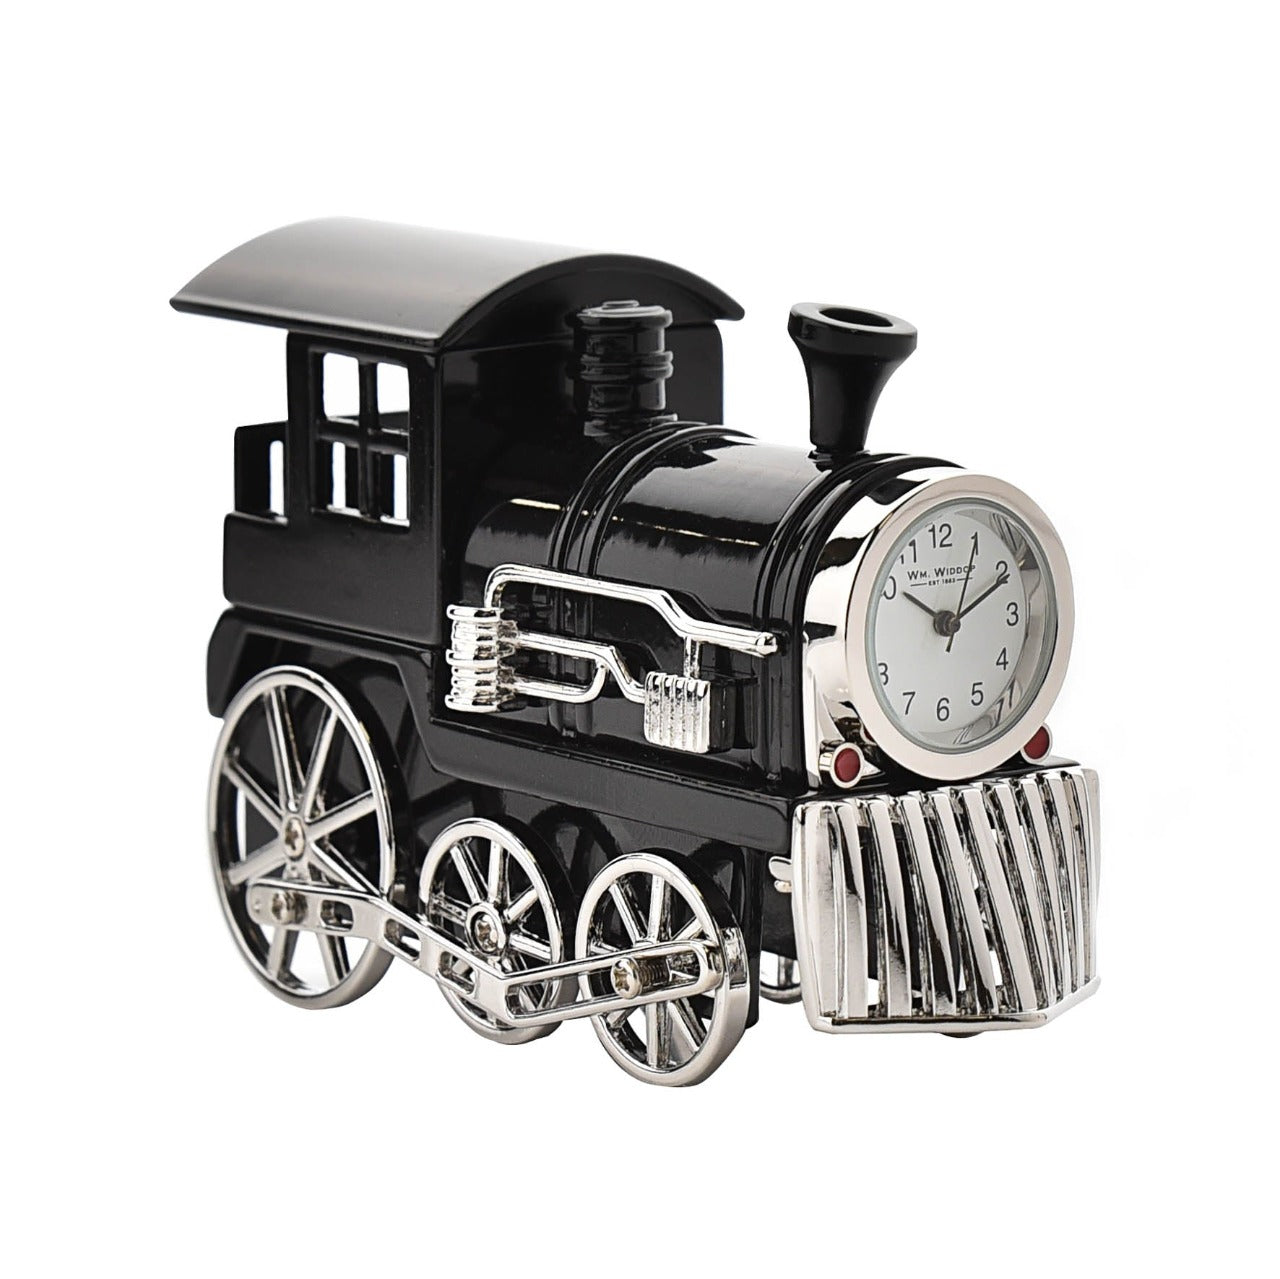 Miniature Clock - Black Steam Train  Give the train fanatic in your life the perfect gift with this intricately detailed miniature steam train clock. From WILLIAM WIDDOP - over 130 years of unrivalled innovation and unbeatable quality in British timekeeping.